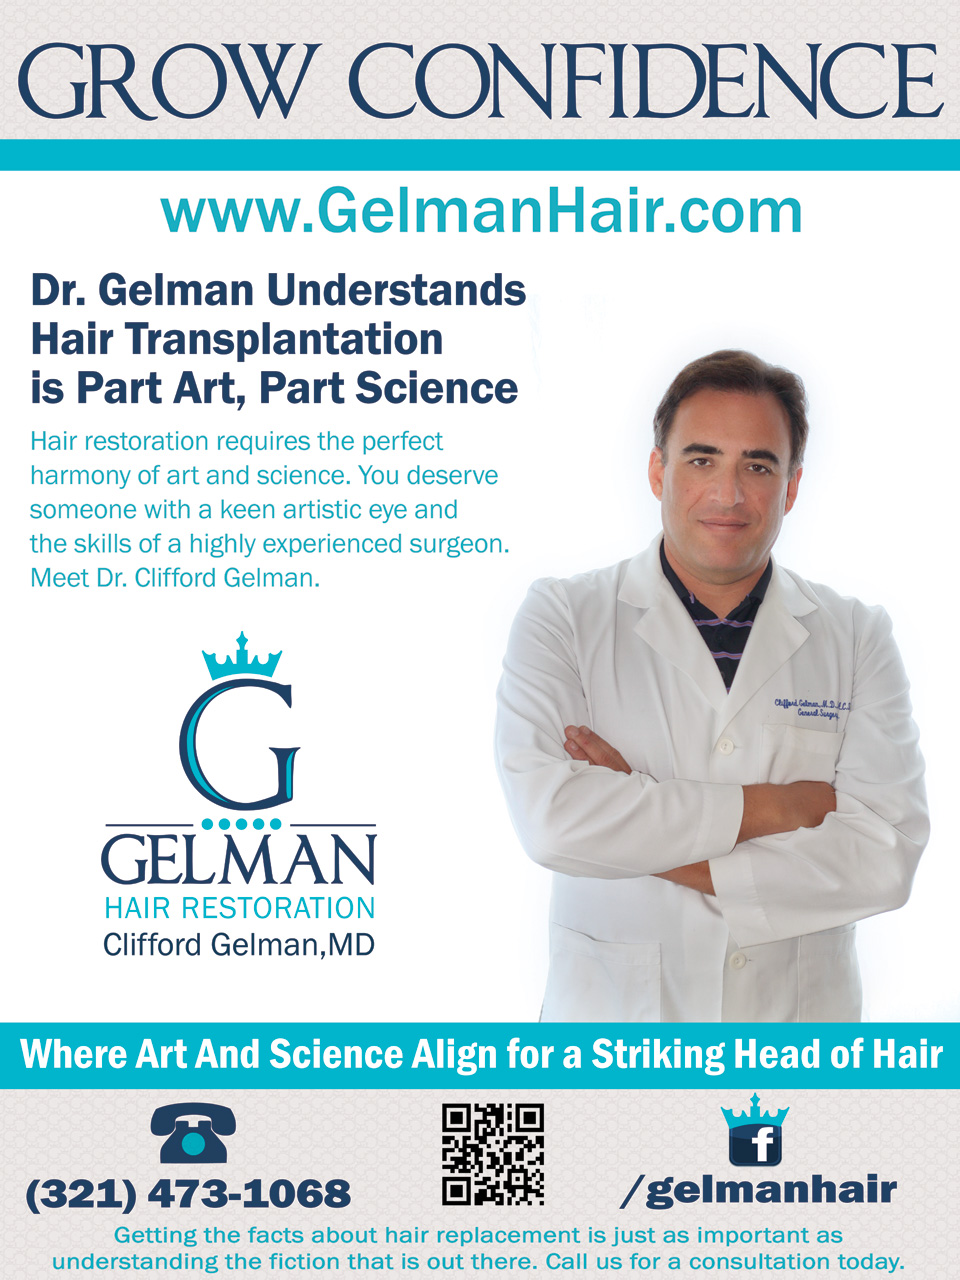 Ad Campaign For Doctor Gelman